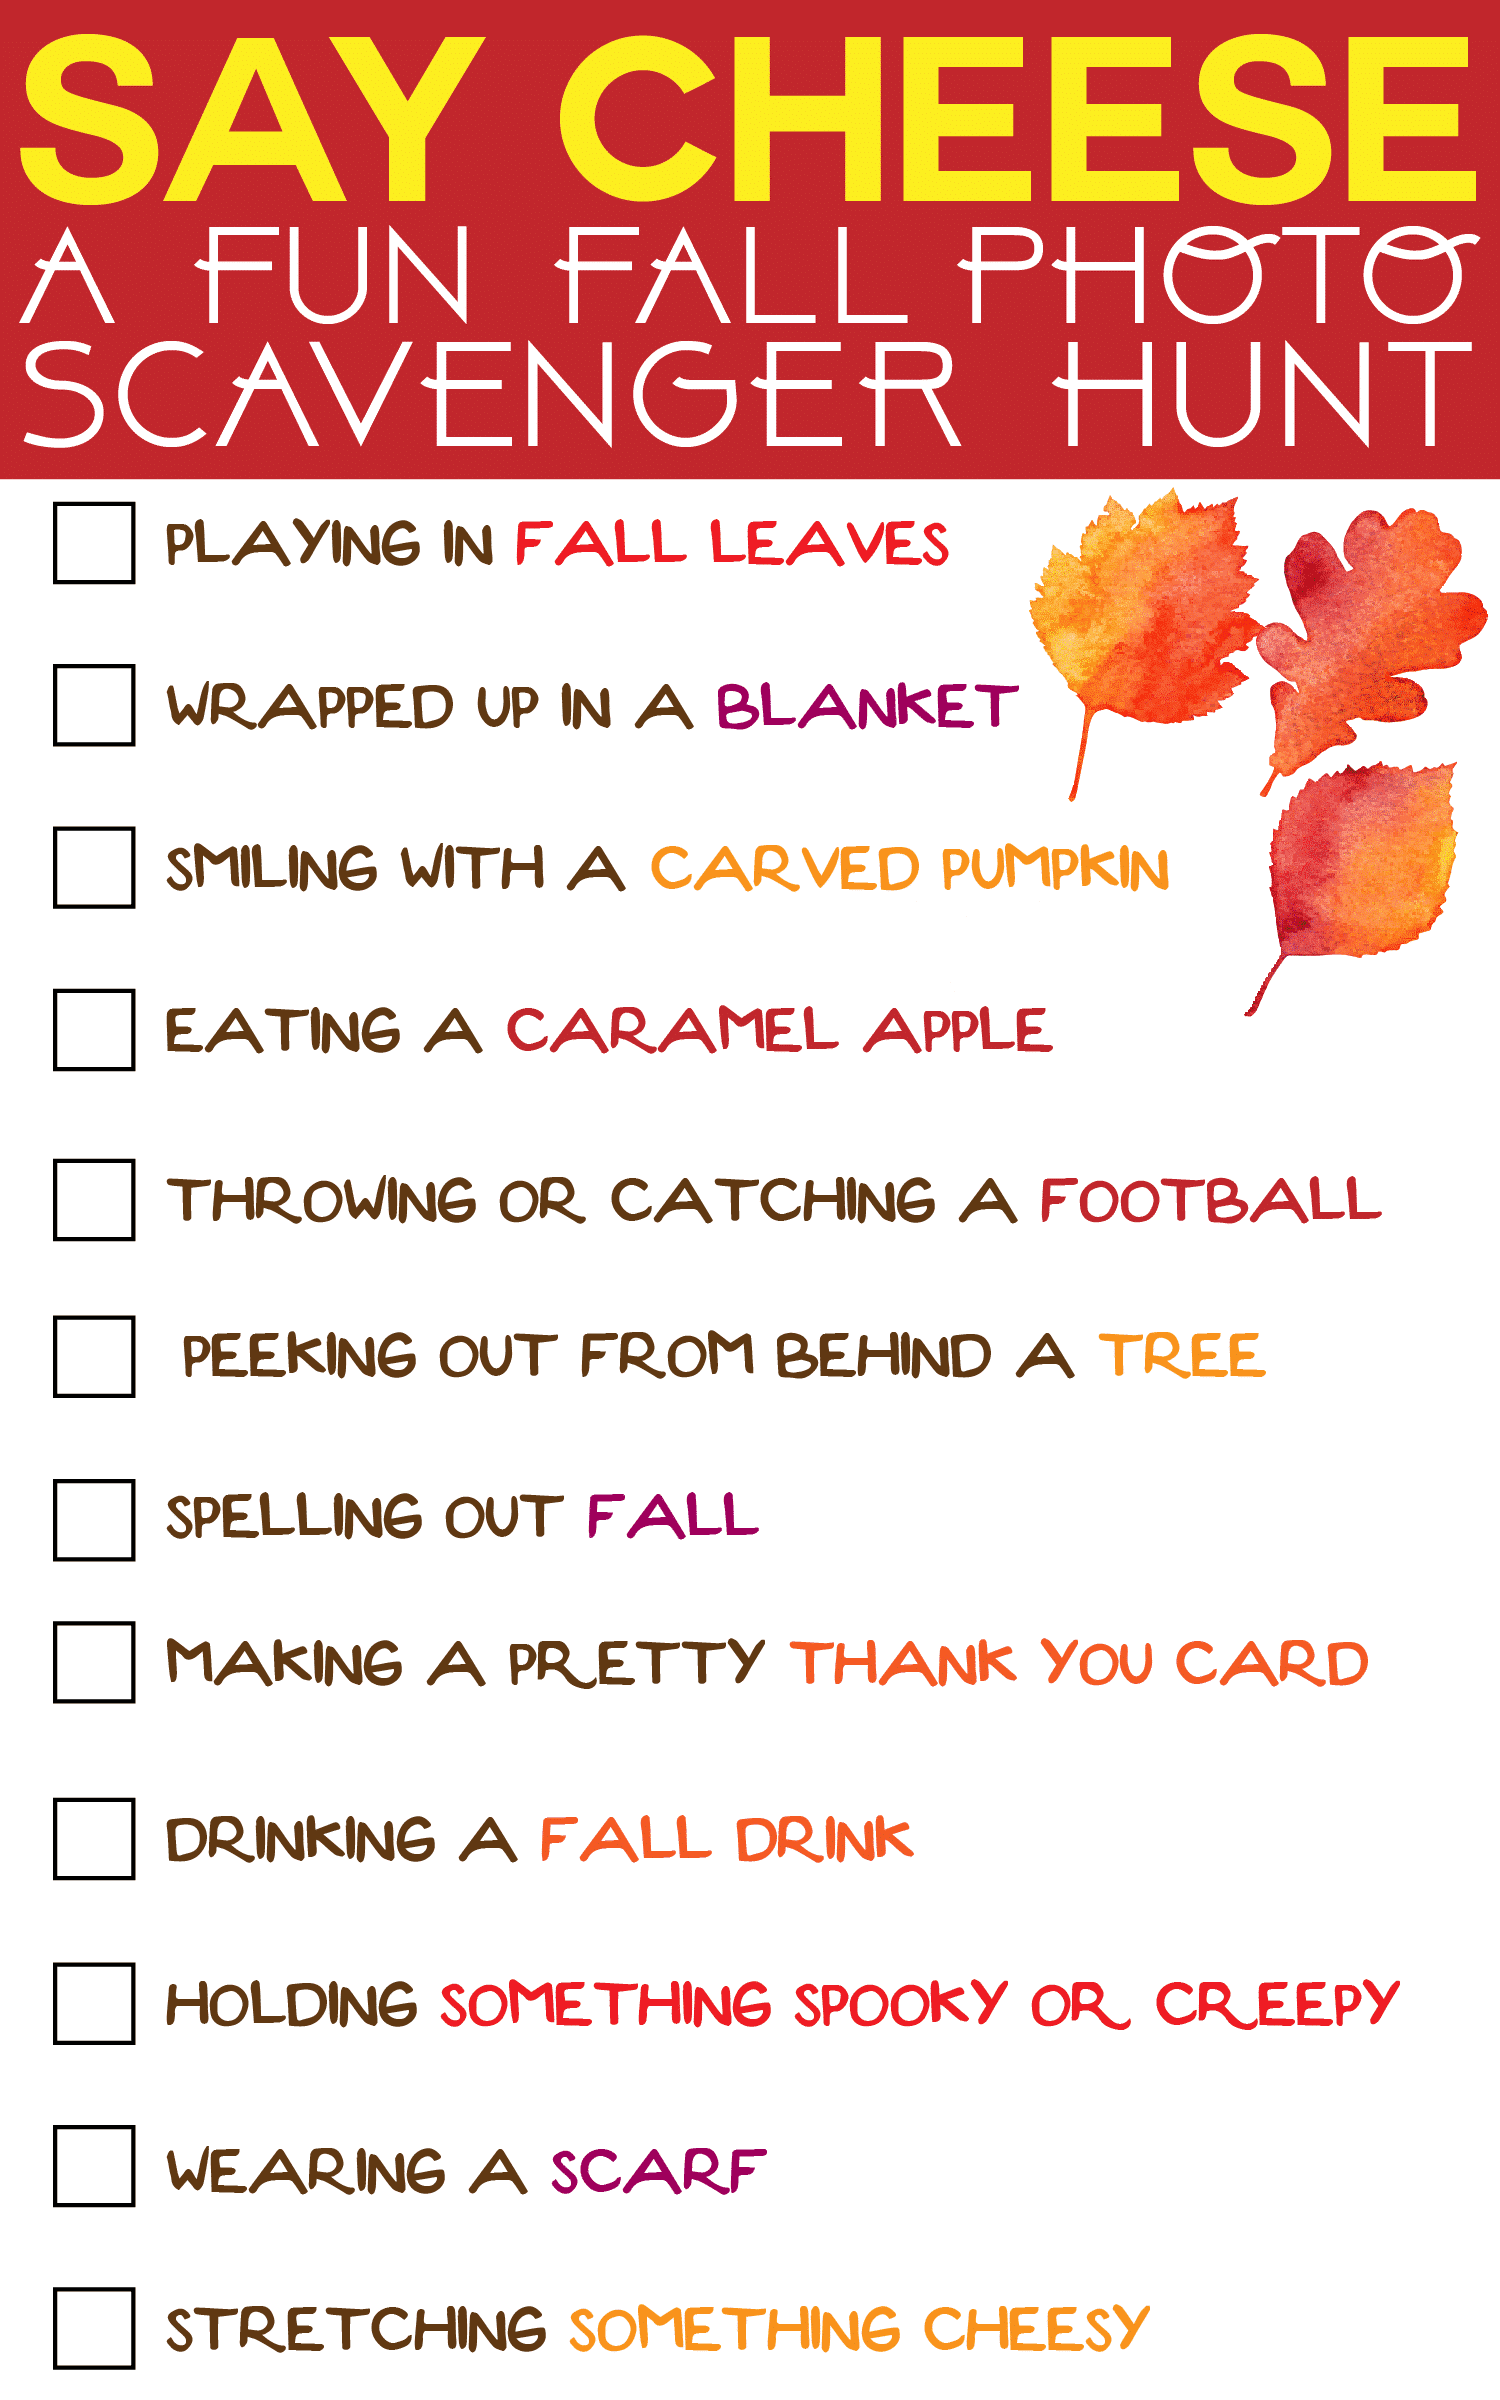 Try out this fun fall photo scavenger hunt